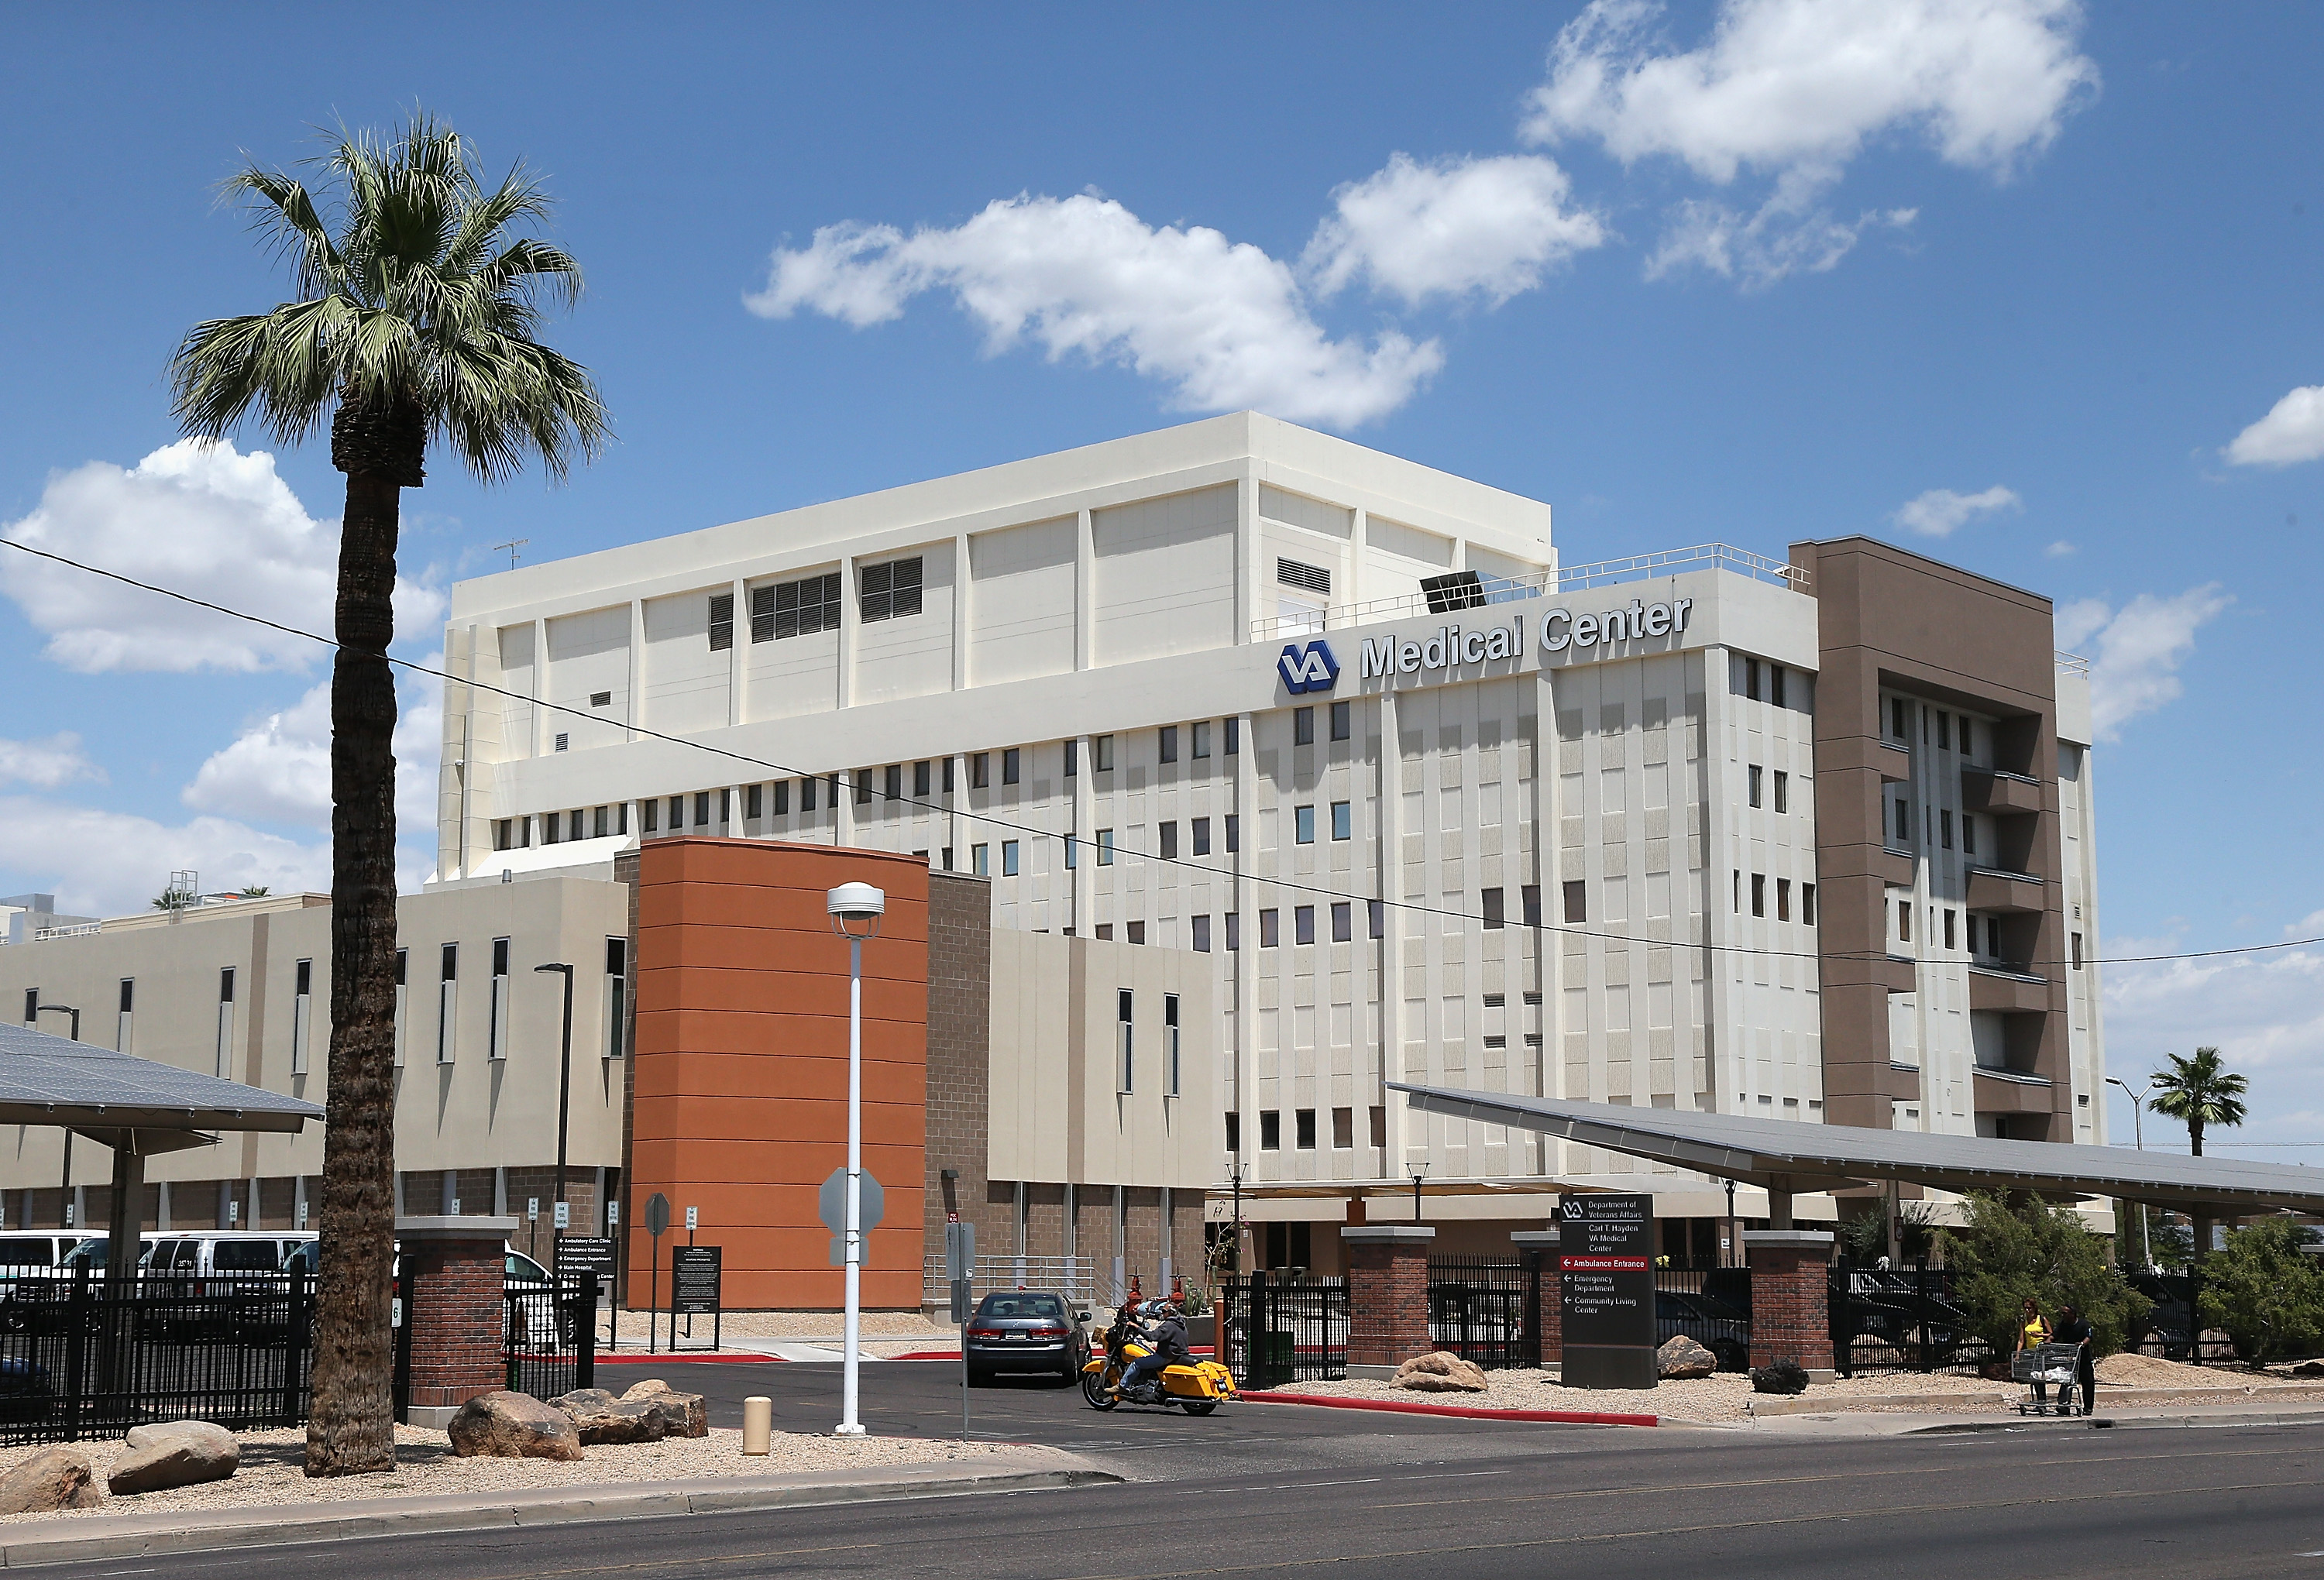 Exterior view of the Veterans Affairs Medical Center on May 8, 2014 in Phoenix, Arizona. (Christian Petersen—Getty Images)